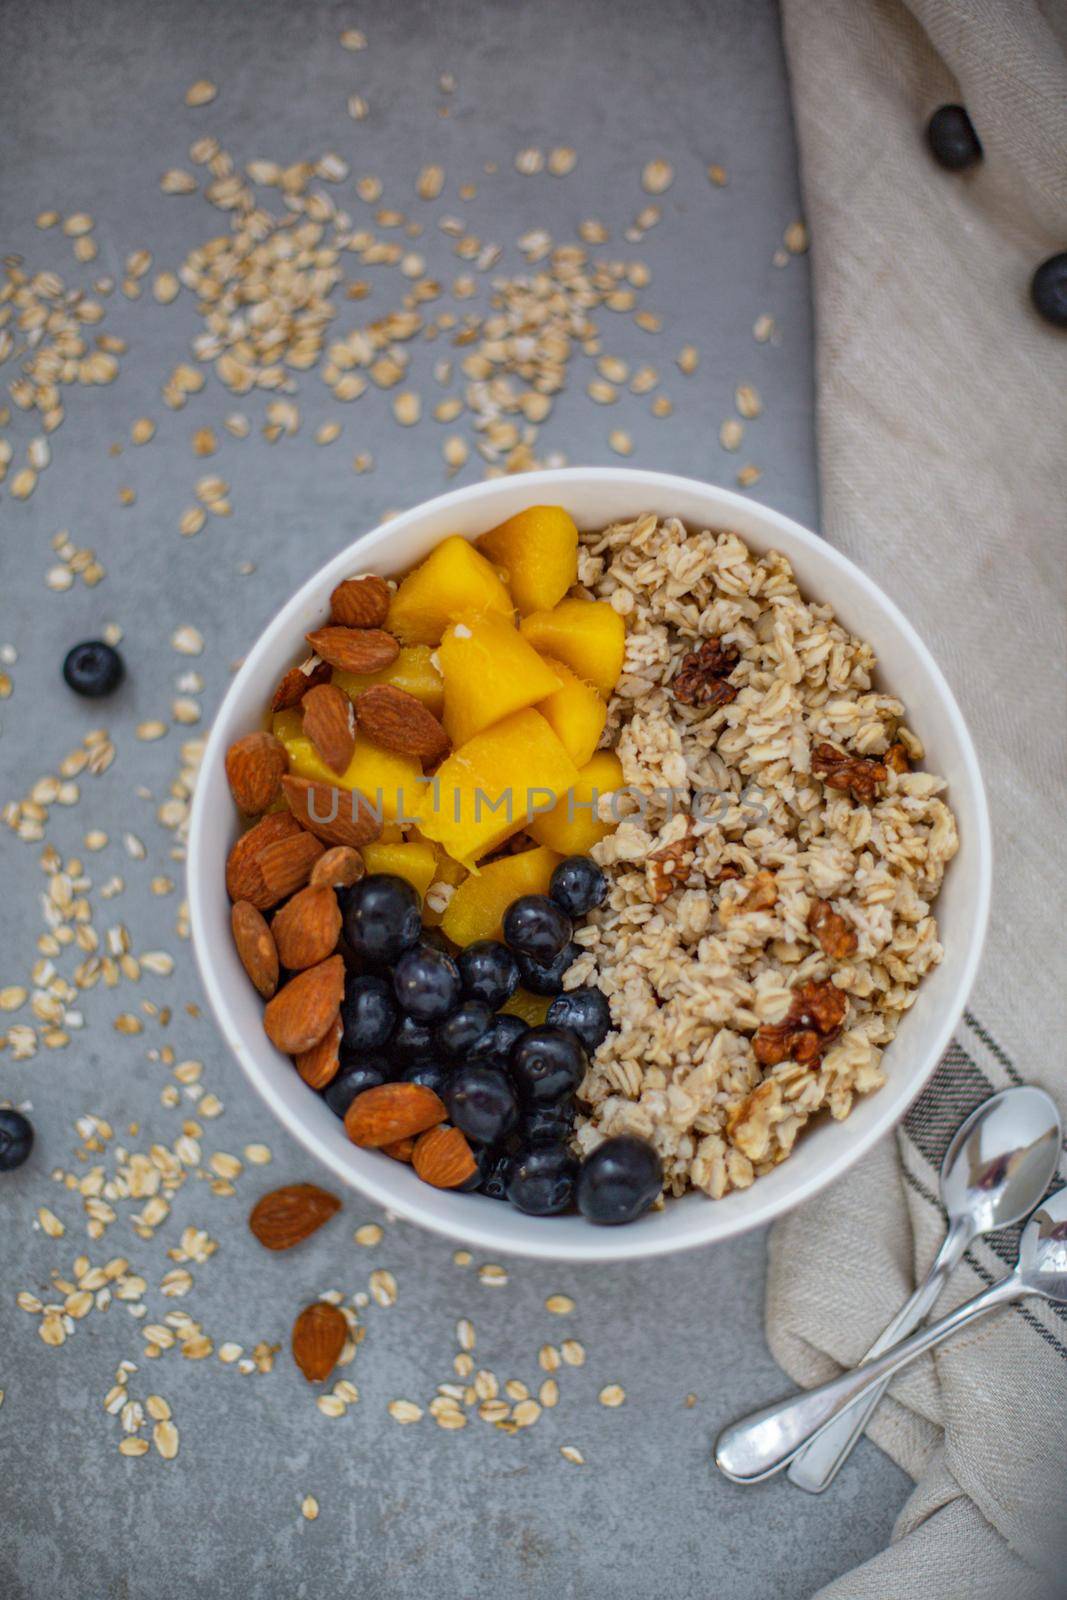 Oatmeal porridge with blueberries, mango and almonds in bowl on concrete grey table from above. flatlay. Healthy breakfast food. Copy space